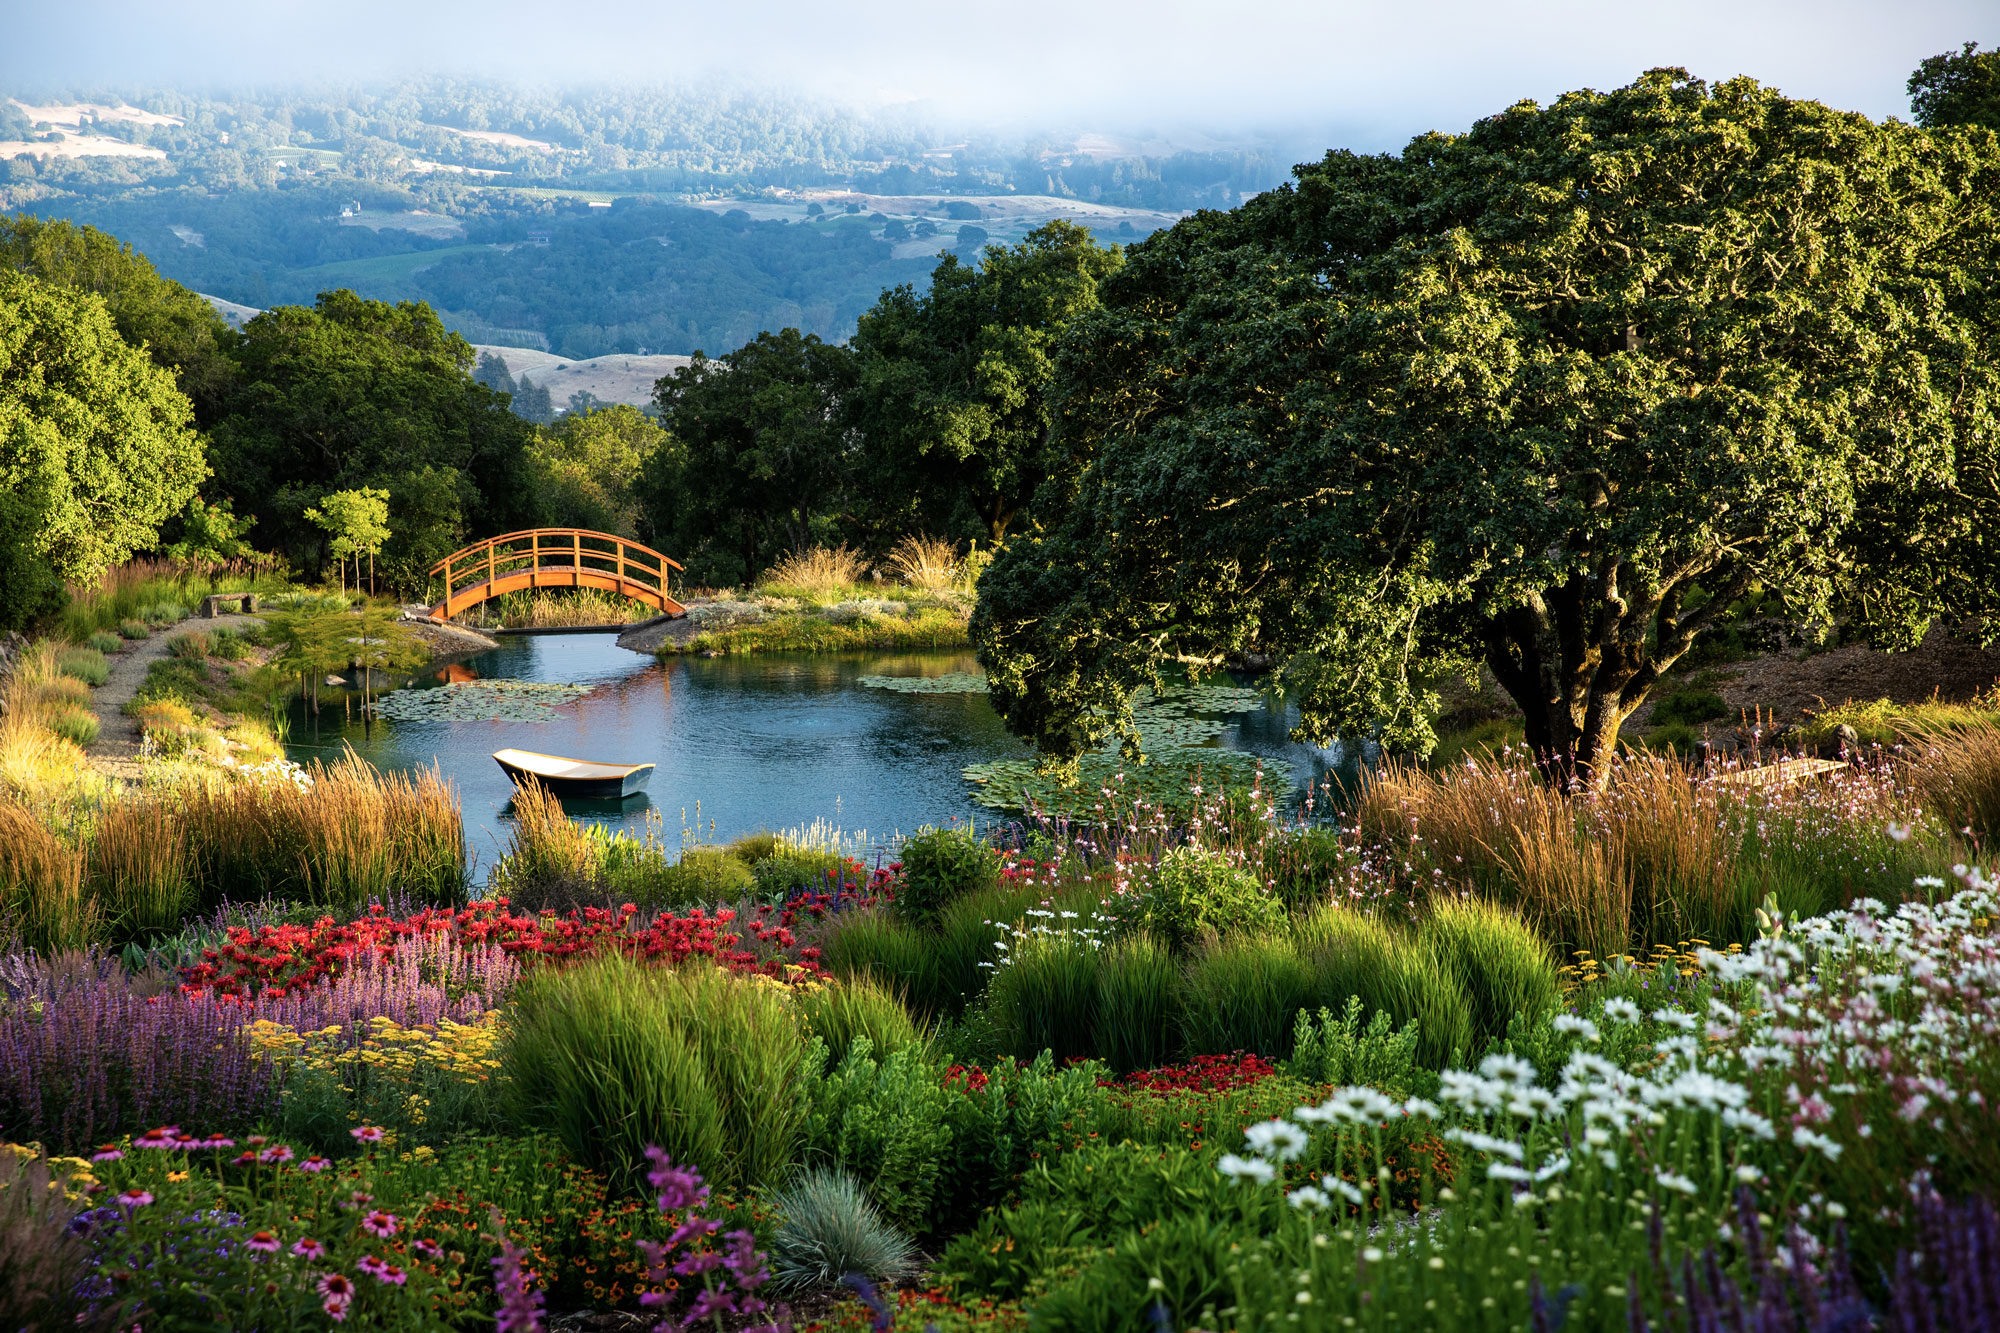 A picturesque Monet inspired garden and property at Coursey Graves in Sonoma County, California